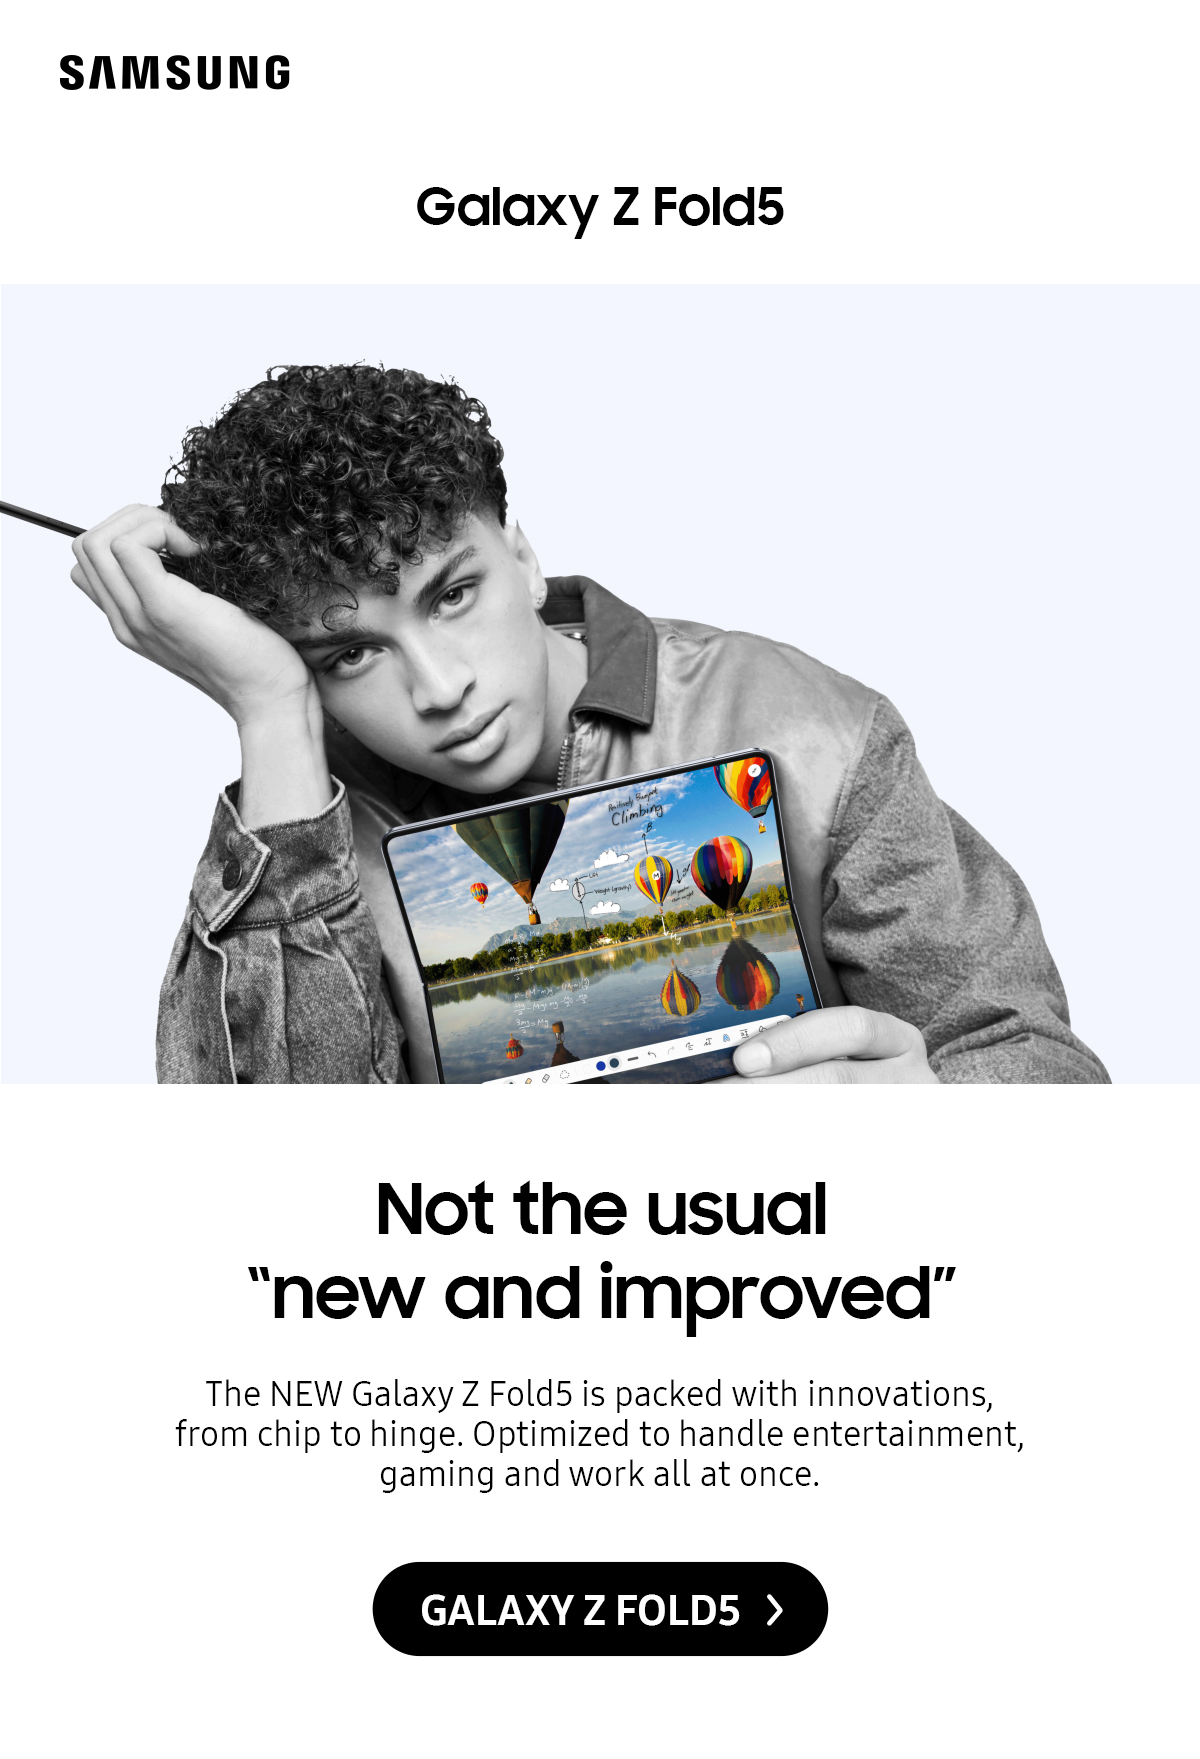 Galaxy Z Fold5: Not the usual "new and improved" | The NEW Galaxy Z Fold5 is packed with innovations, from chip to hinge. Optimized to handle entertainment, gaming and work all at once. Click here to see more!